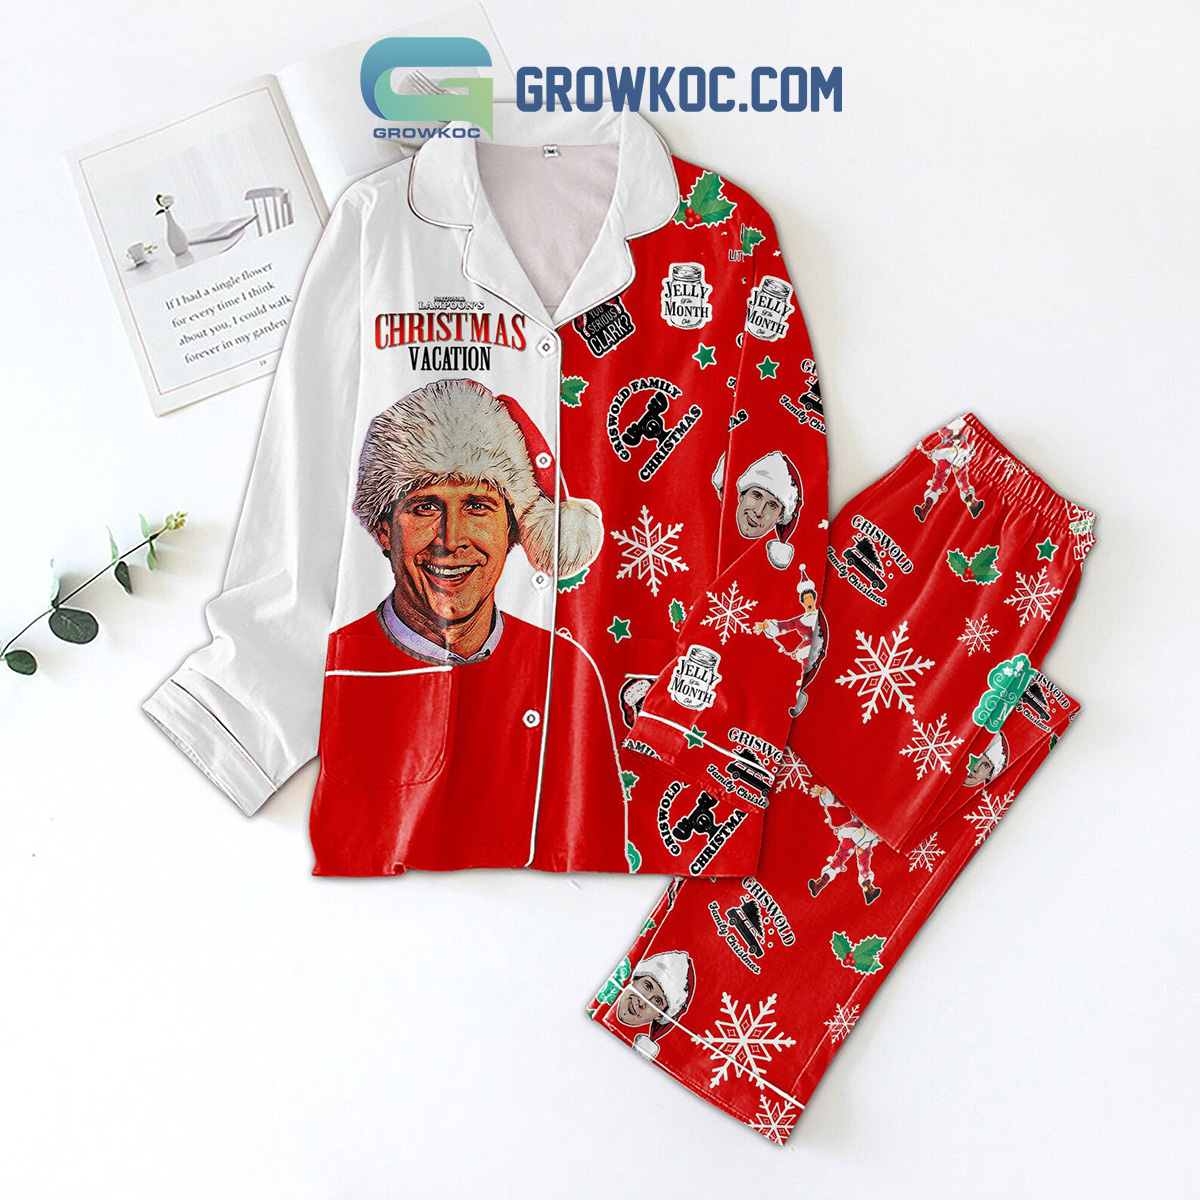 Griswold Family Christmas National Lampoons's Christmas Vacation Pajamas Sets